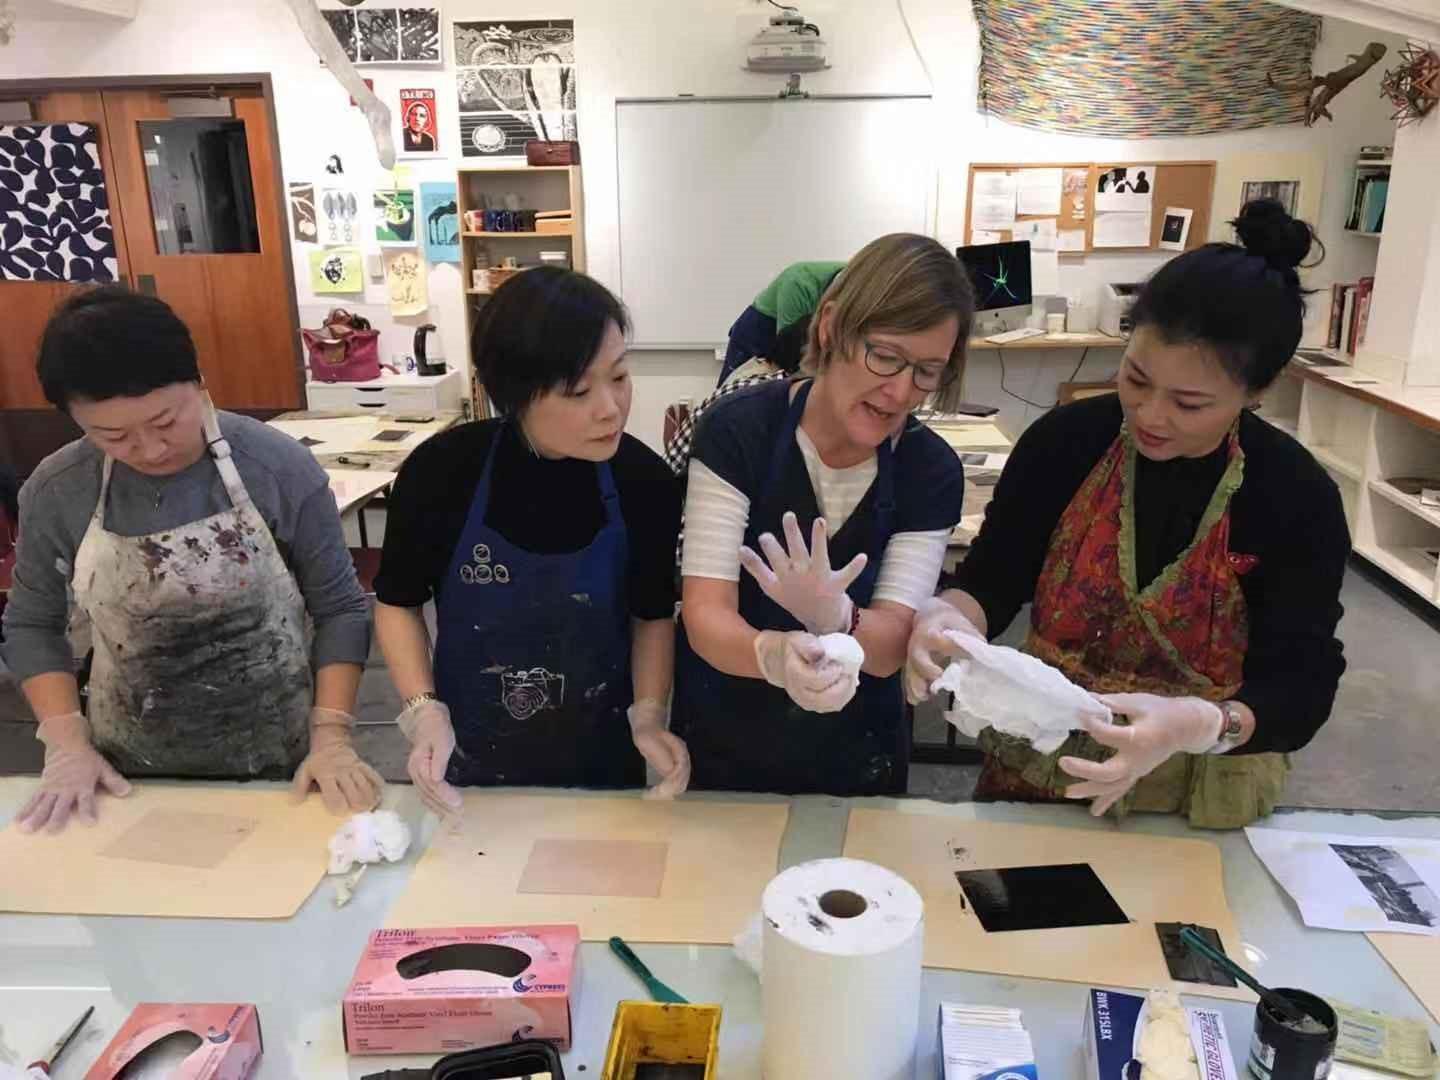 The Visiting Scholars team wears paint-stained aprons as they work on art project at ECA school.